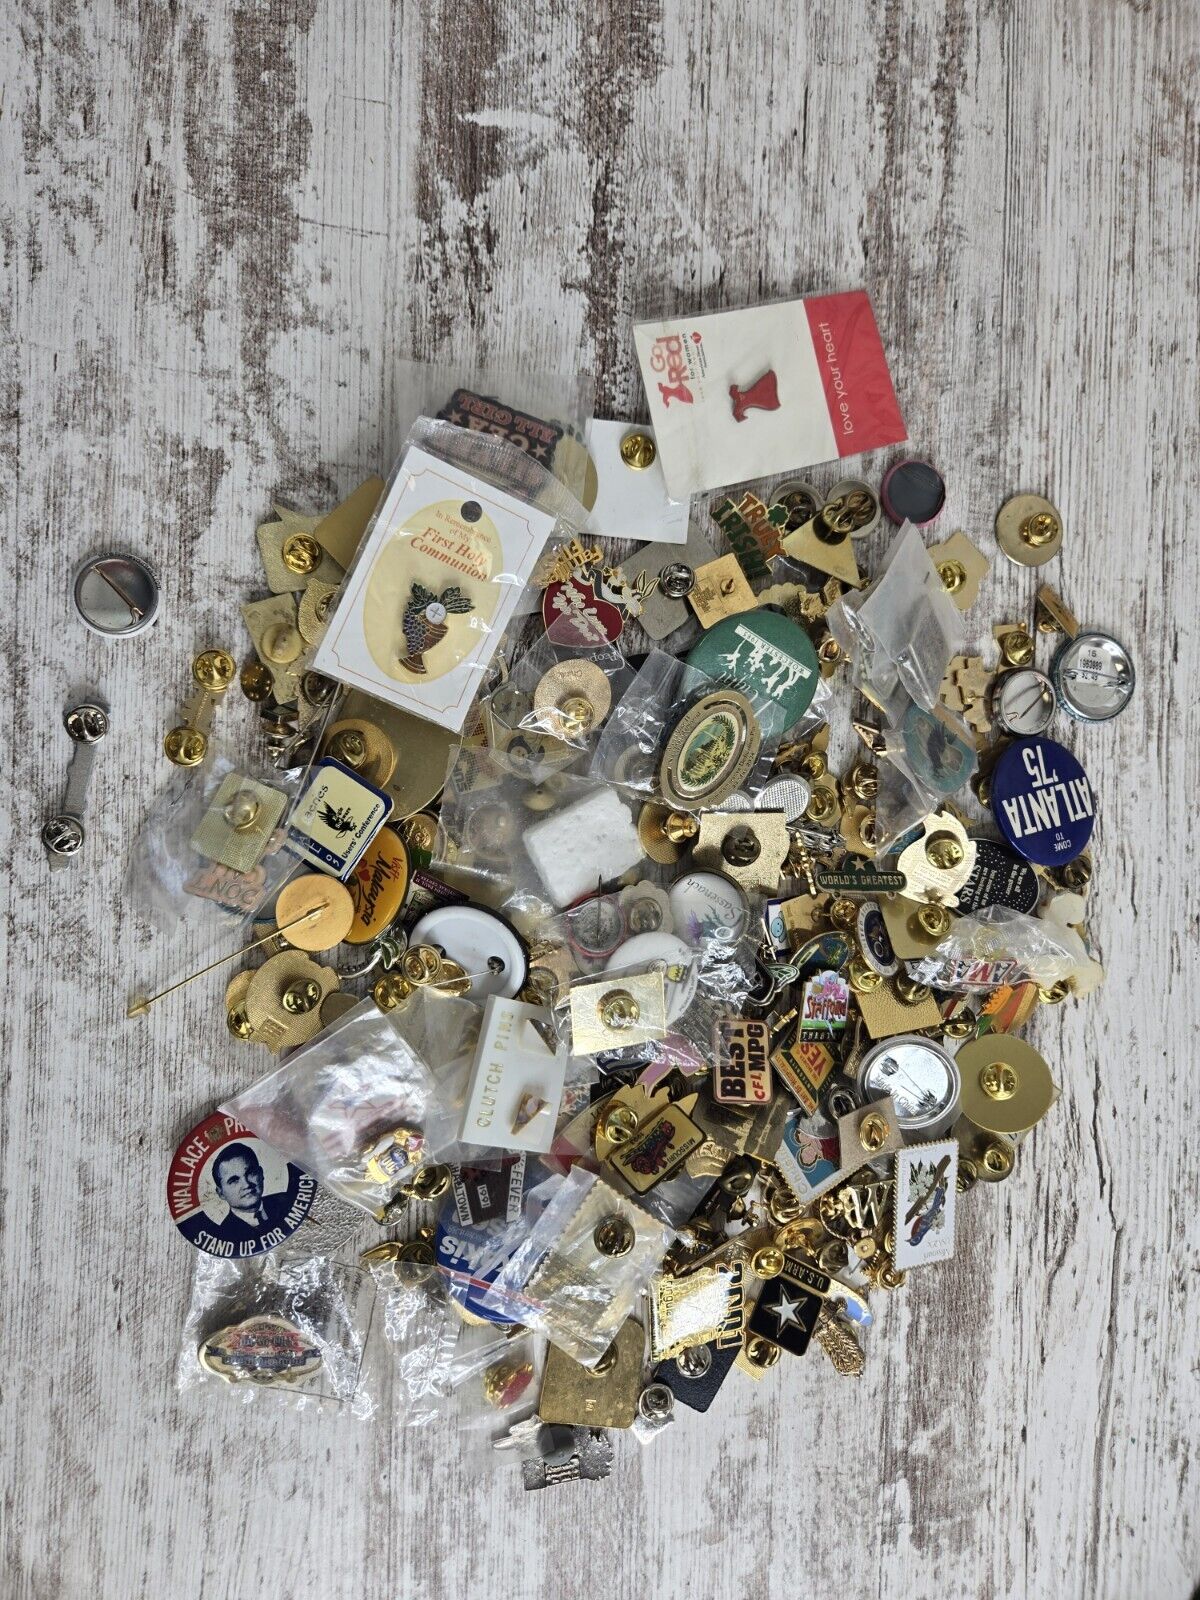 Huge LOT of Vintage Lapel Button Pins 2.7 Lbs MANY THEMES Collection